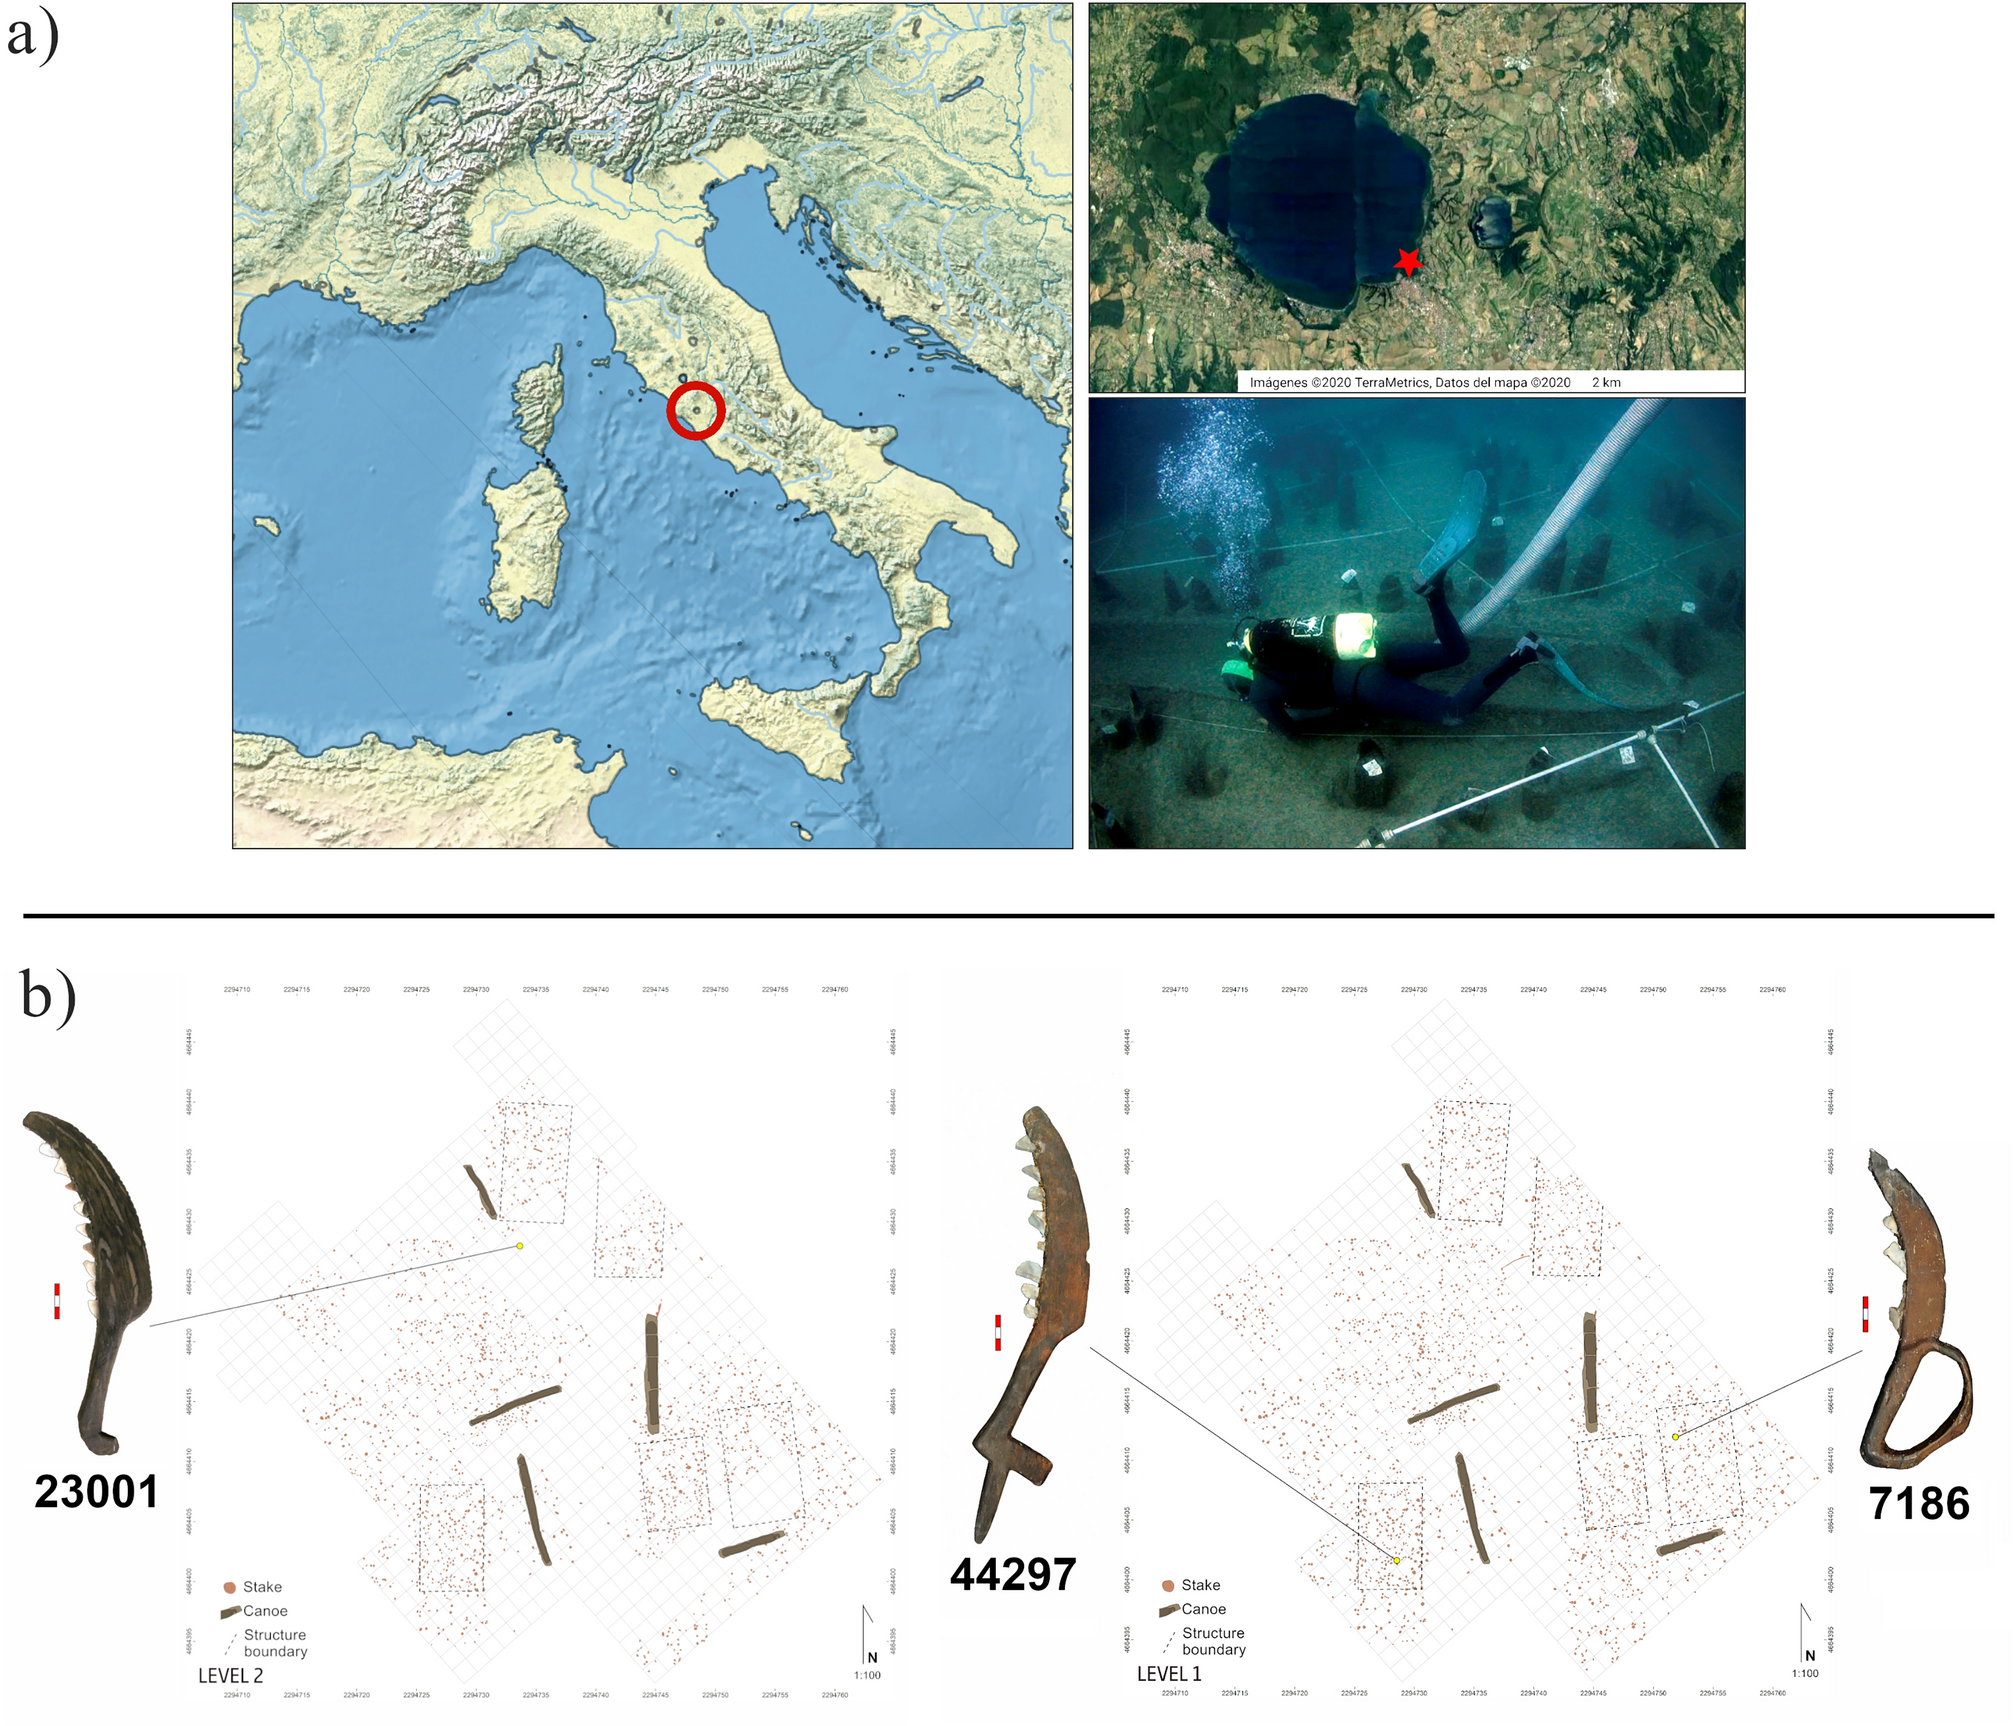 Multiproxy study of 7500-year-old wooden sickles from the Lakeshore Village  of La Marmotta, Italy | Scientific Reports